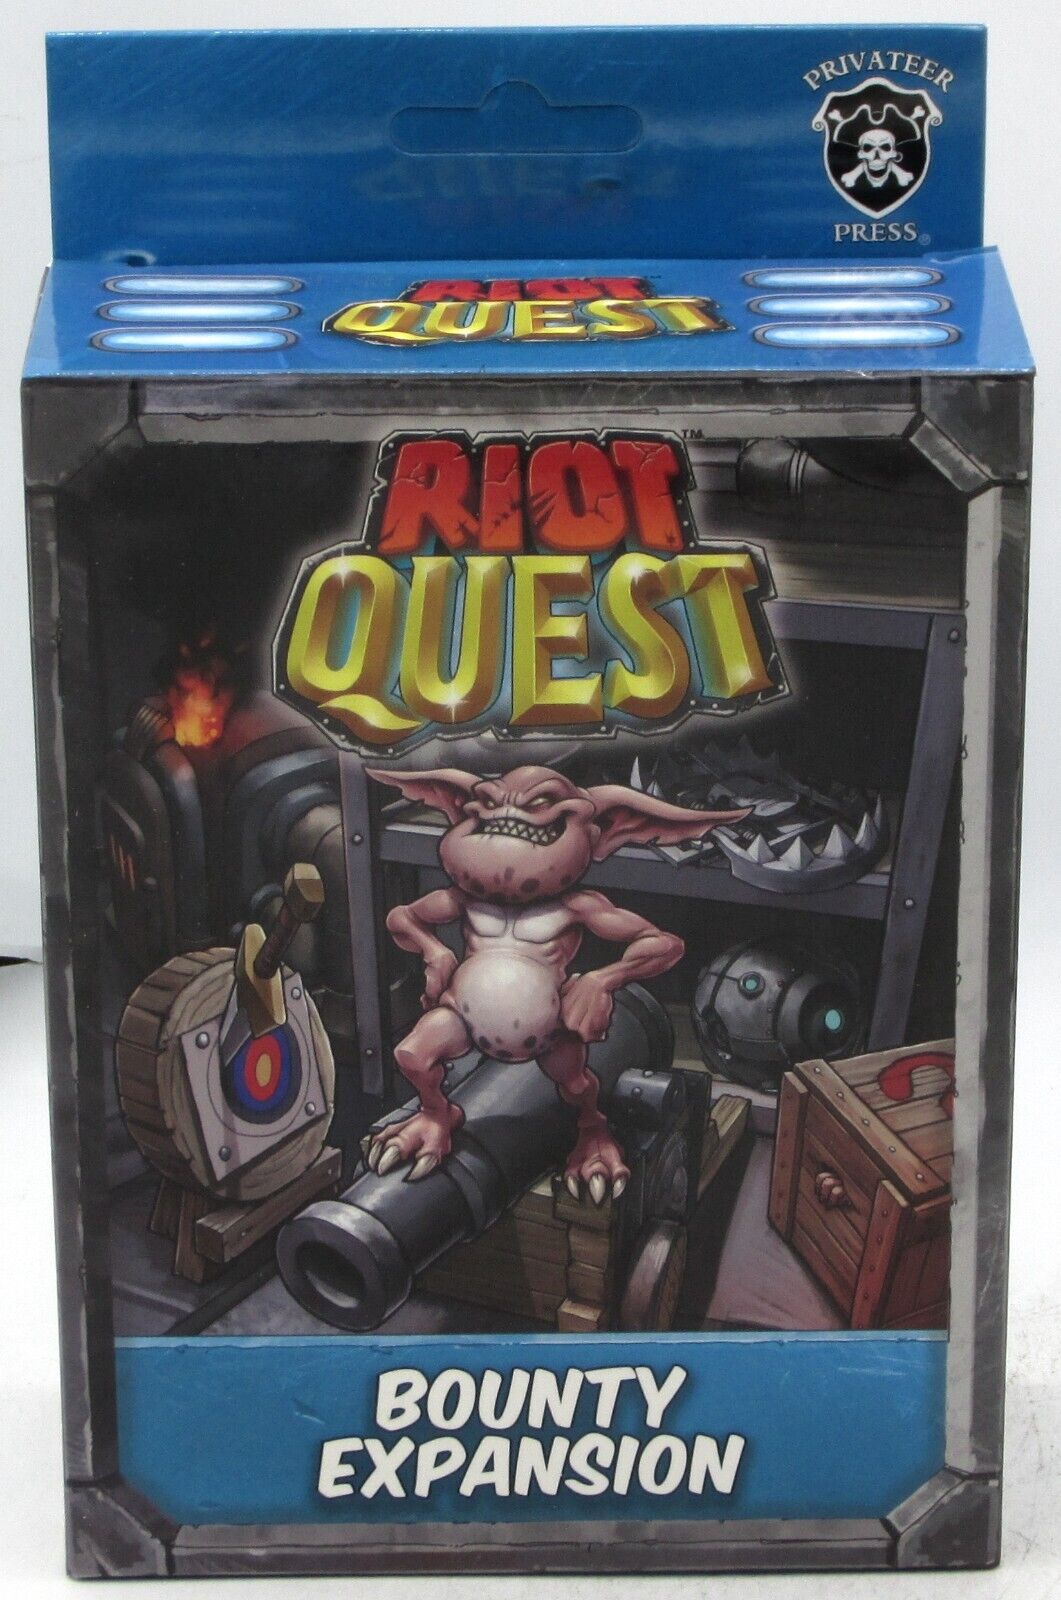 Riot Quest Pip63061 Bounty Expansion (miniatures) Treasure Loot Privateer Press